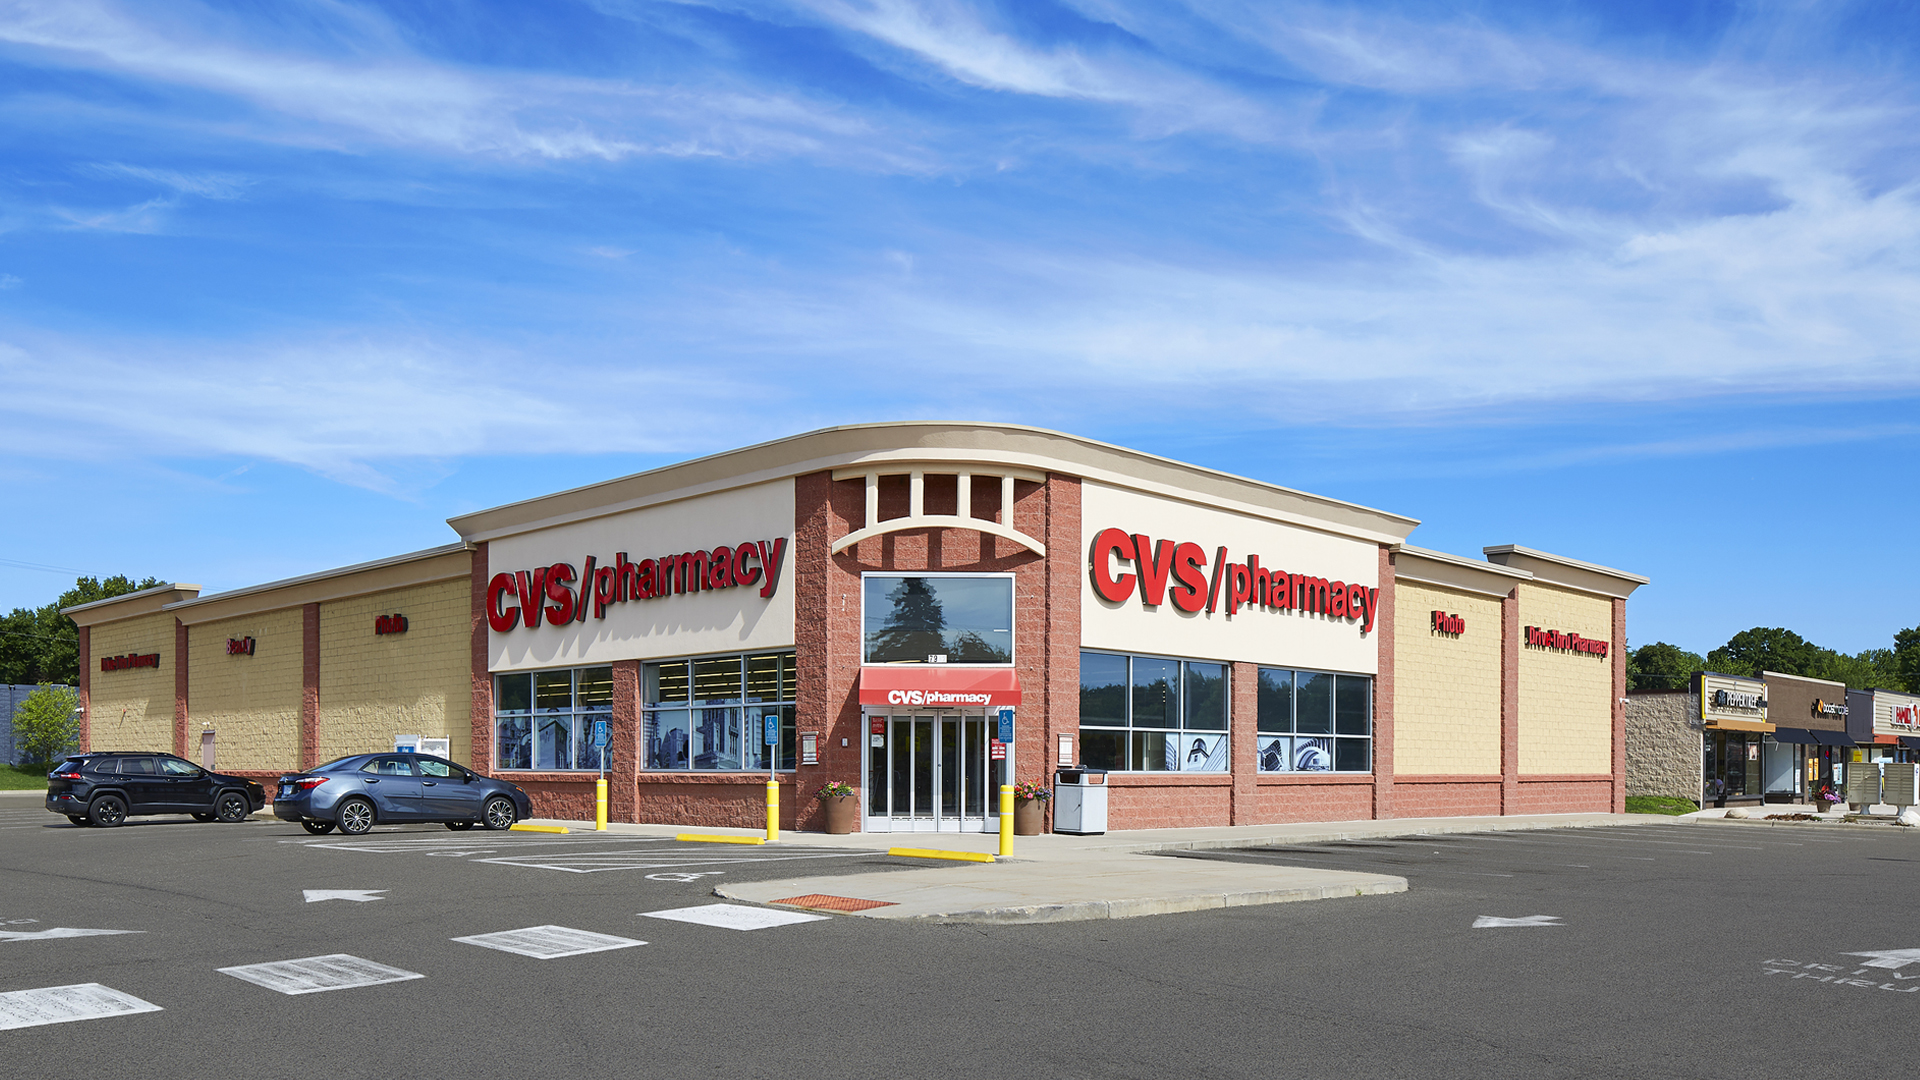 Midland Retail Shopping Center New Hope MN exterior featuring CVS Pharmacy